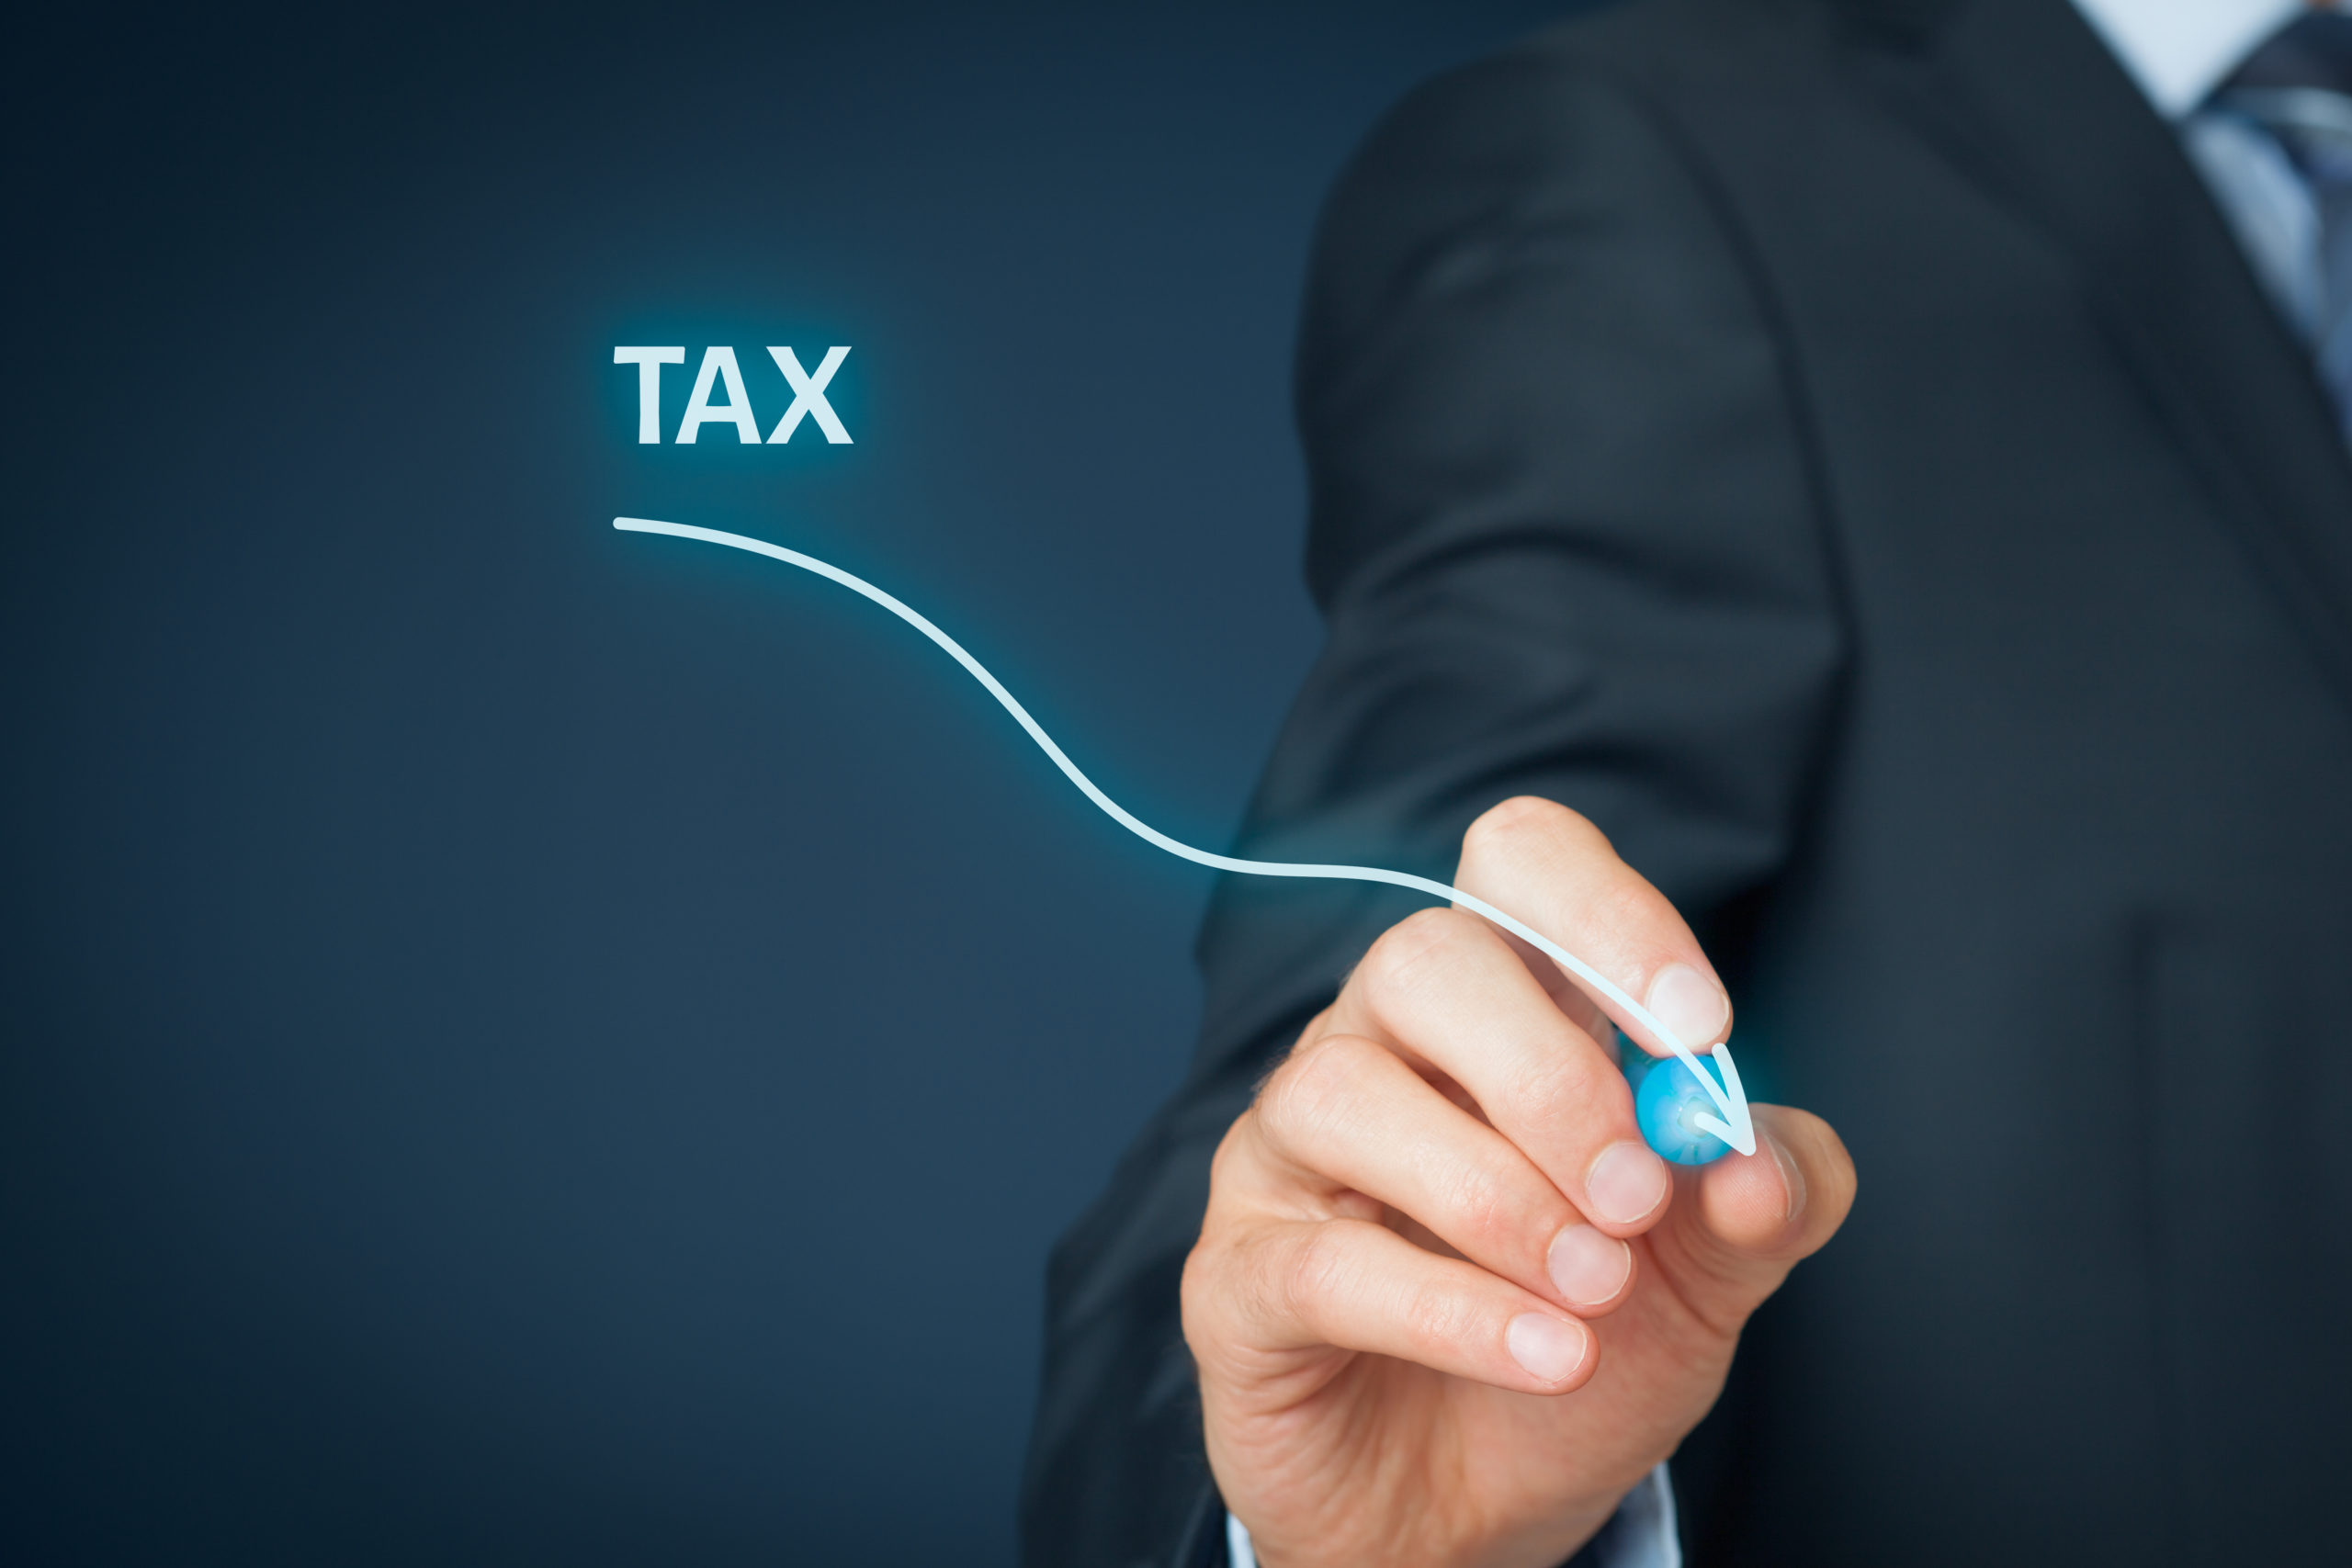 Company Tax Rate Reduction – 1 July 2020